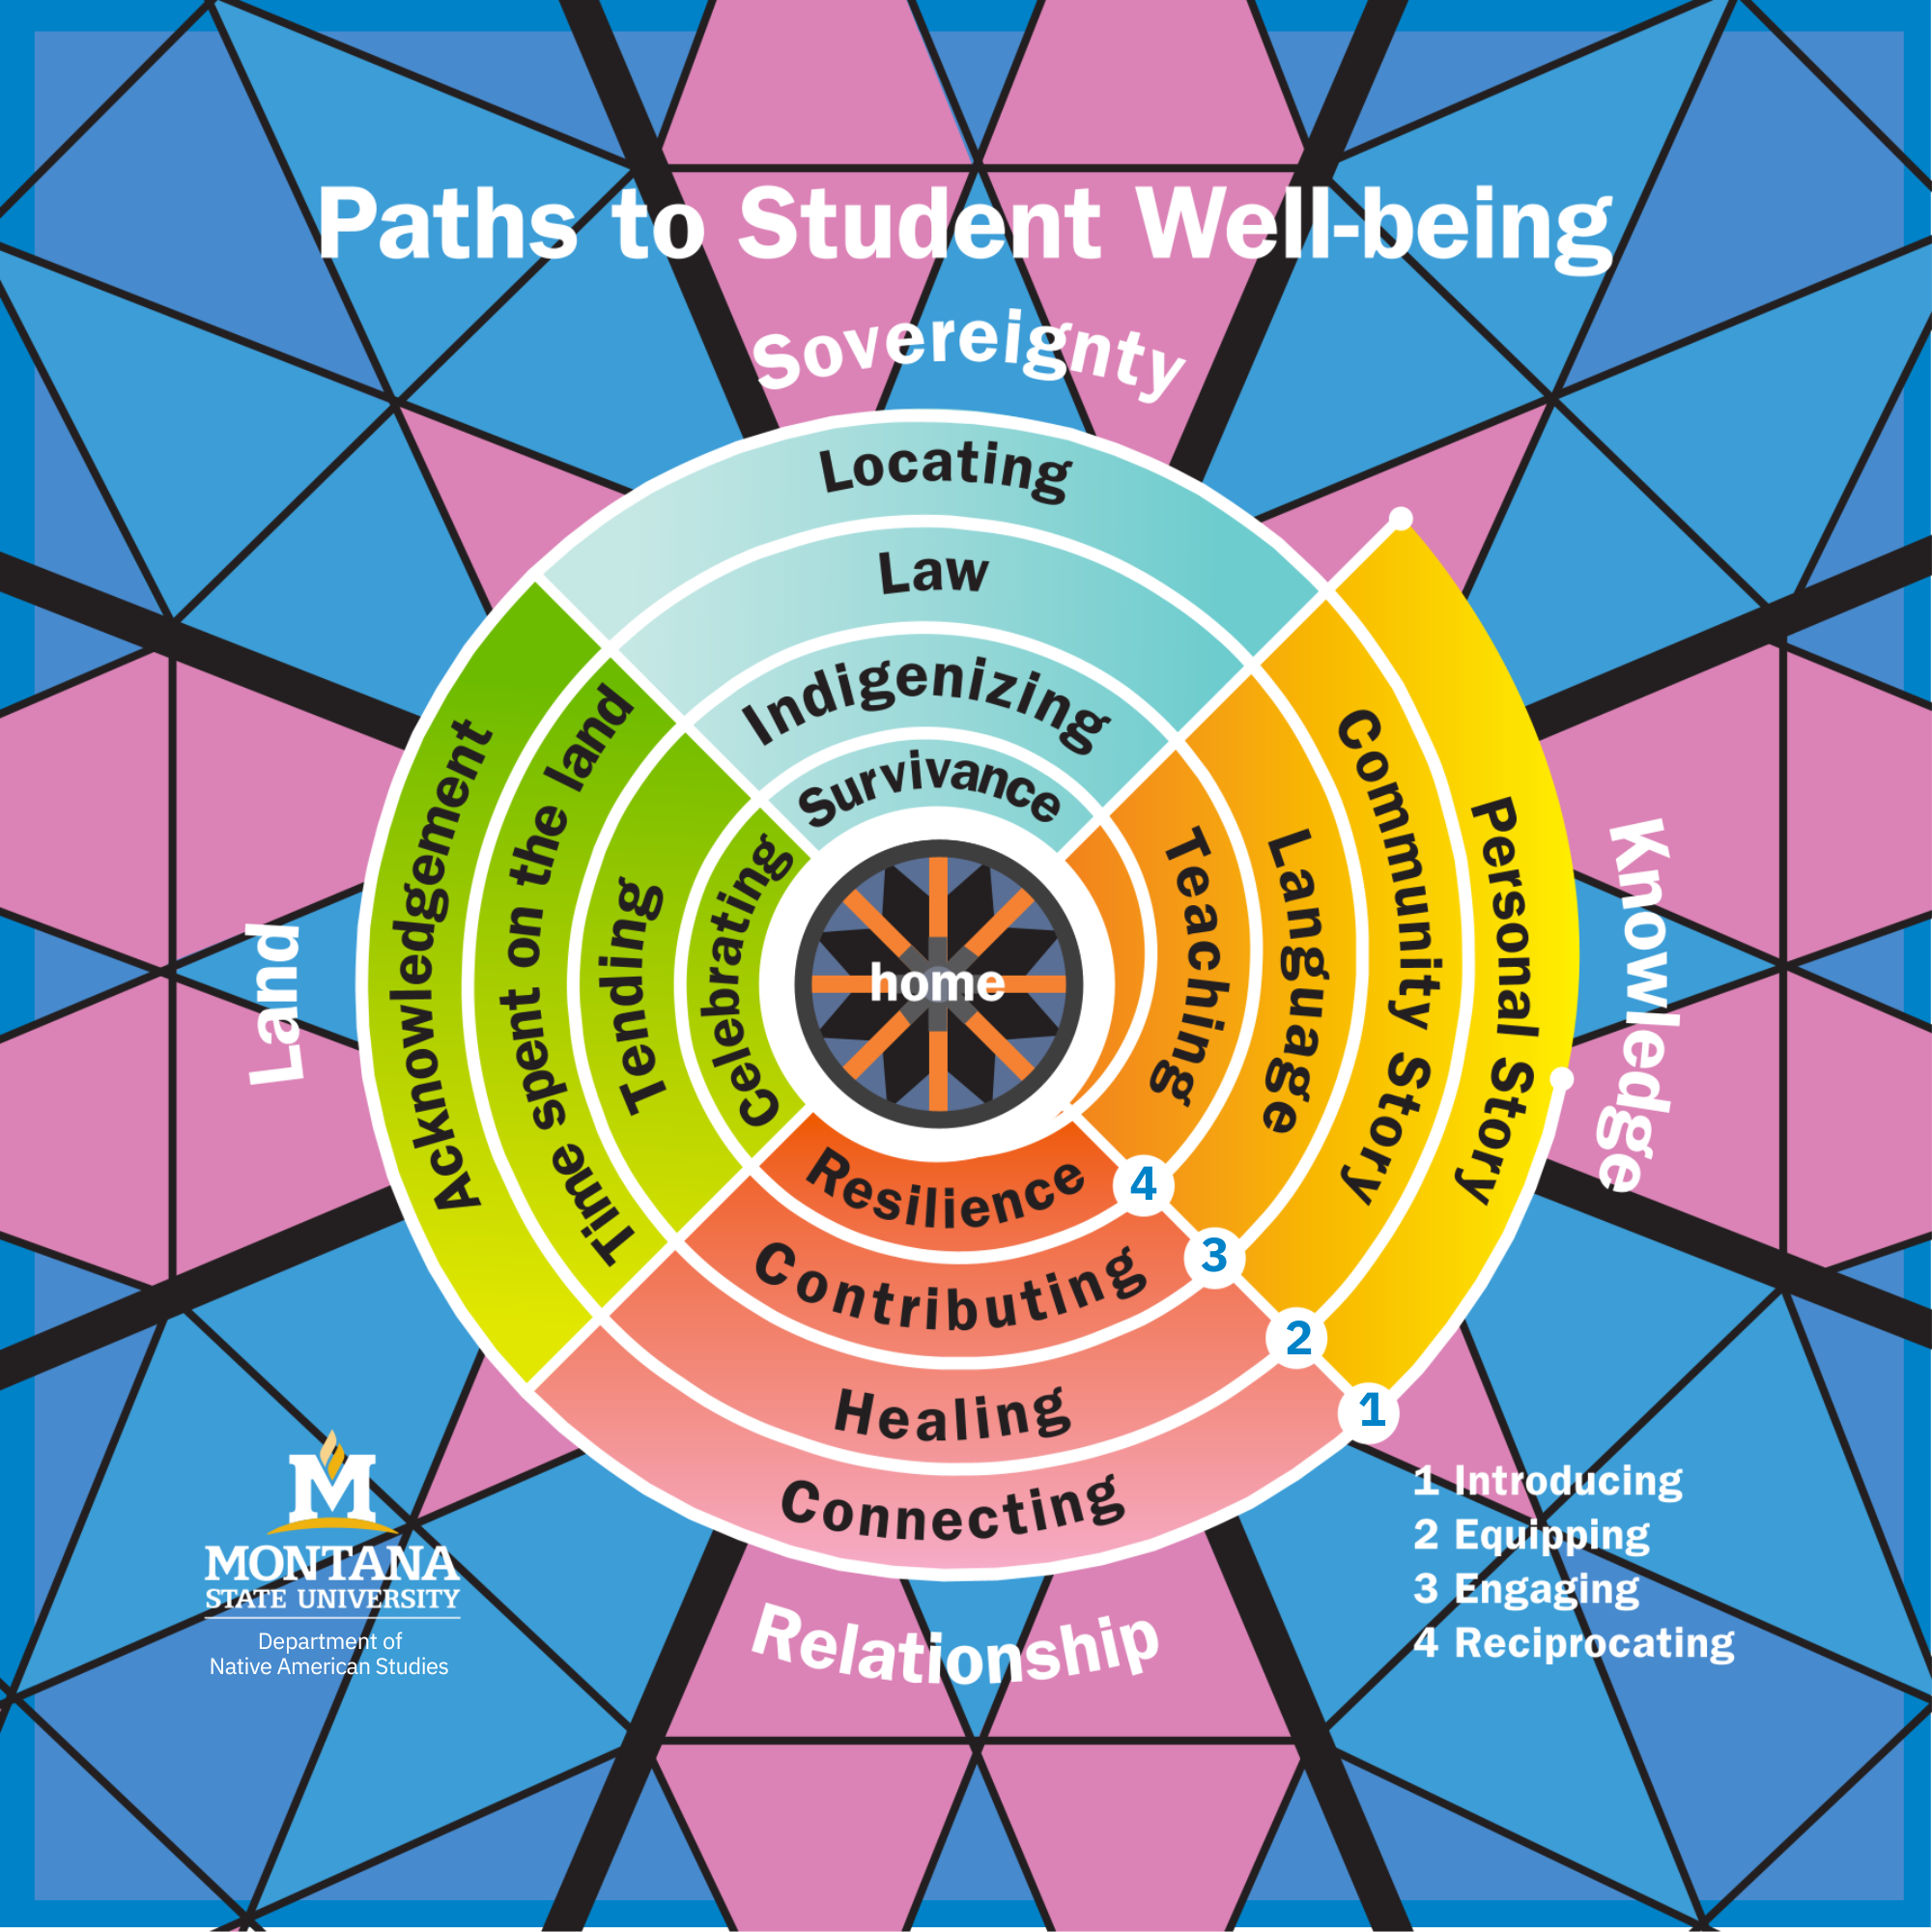 This is our Student Well-Being Model, pictured as four quadrants, beginning on the right hand side of the image and going clockwise: Knowledge, Relationship, Land, and Sovereignty. There are four layers of qualities to each quadrant descending in a spiral toward the center, which is home. The Knowledge quadrant, from outer to inner-most, contains Personal Story, Community Story, Language, and Teaching. The Relationship Quadrant: Connecting, Healing, Contributing, and Resilience. The Land Quadrant: Acknowledgement, Time Spent on the Land, Tending, and Celebrating. Finally, the Sovereignty quadrant: Locating, Law, Indigenizing, and Survivance.